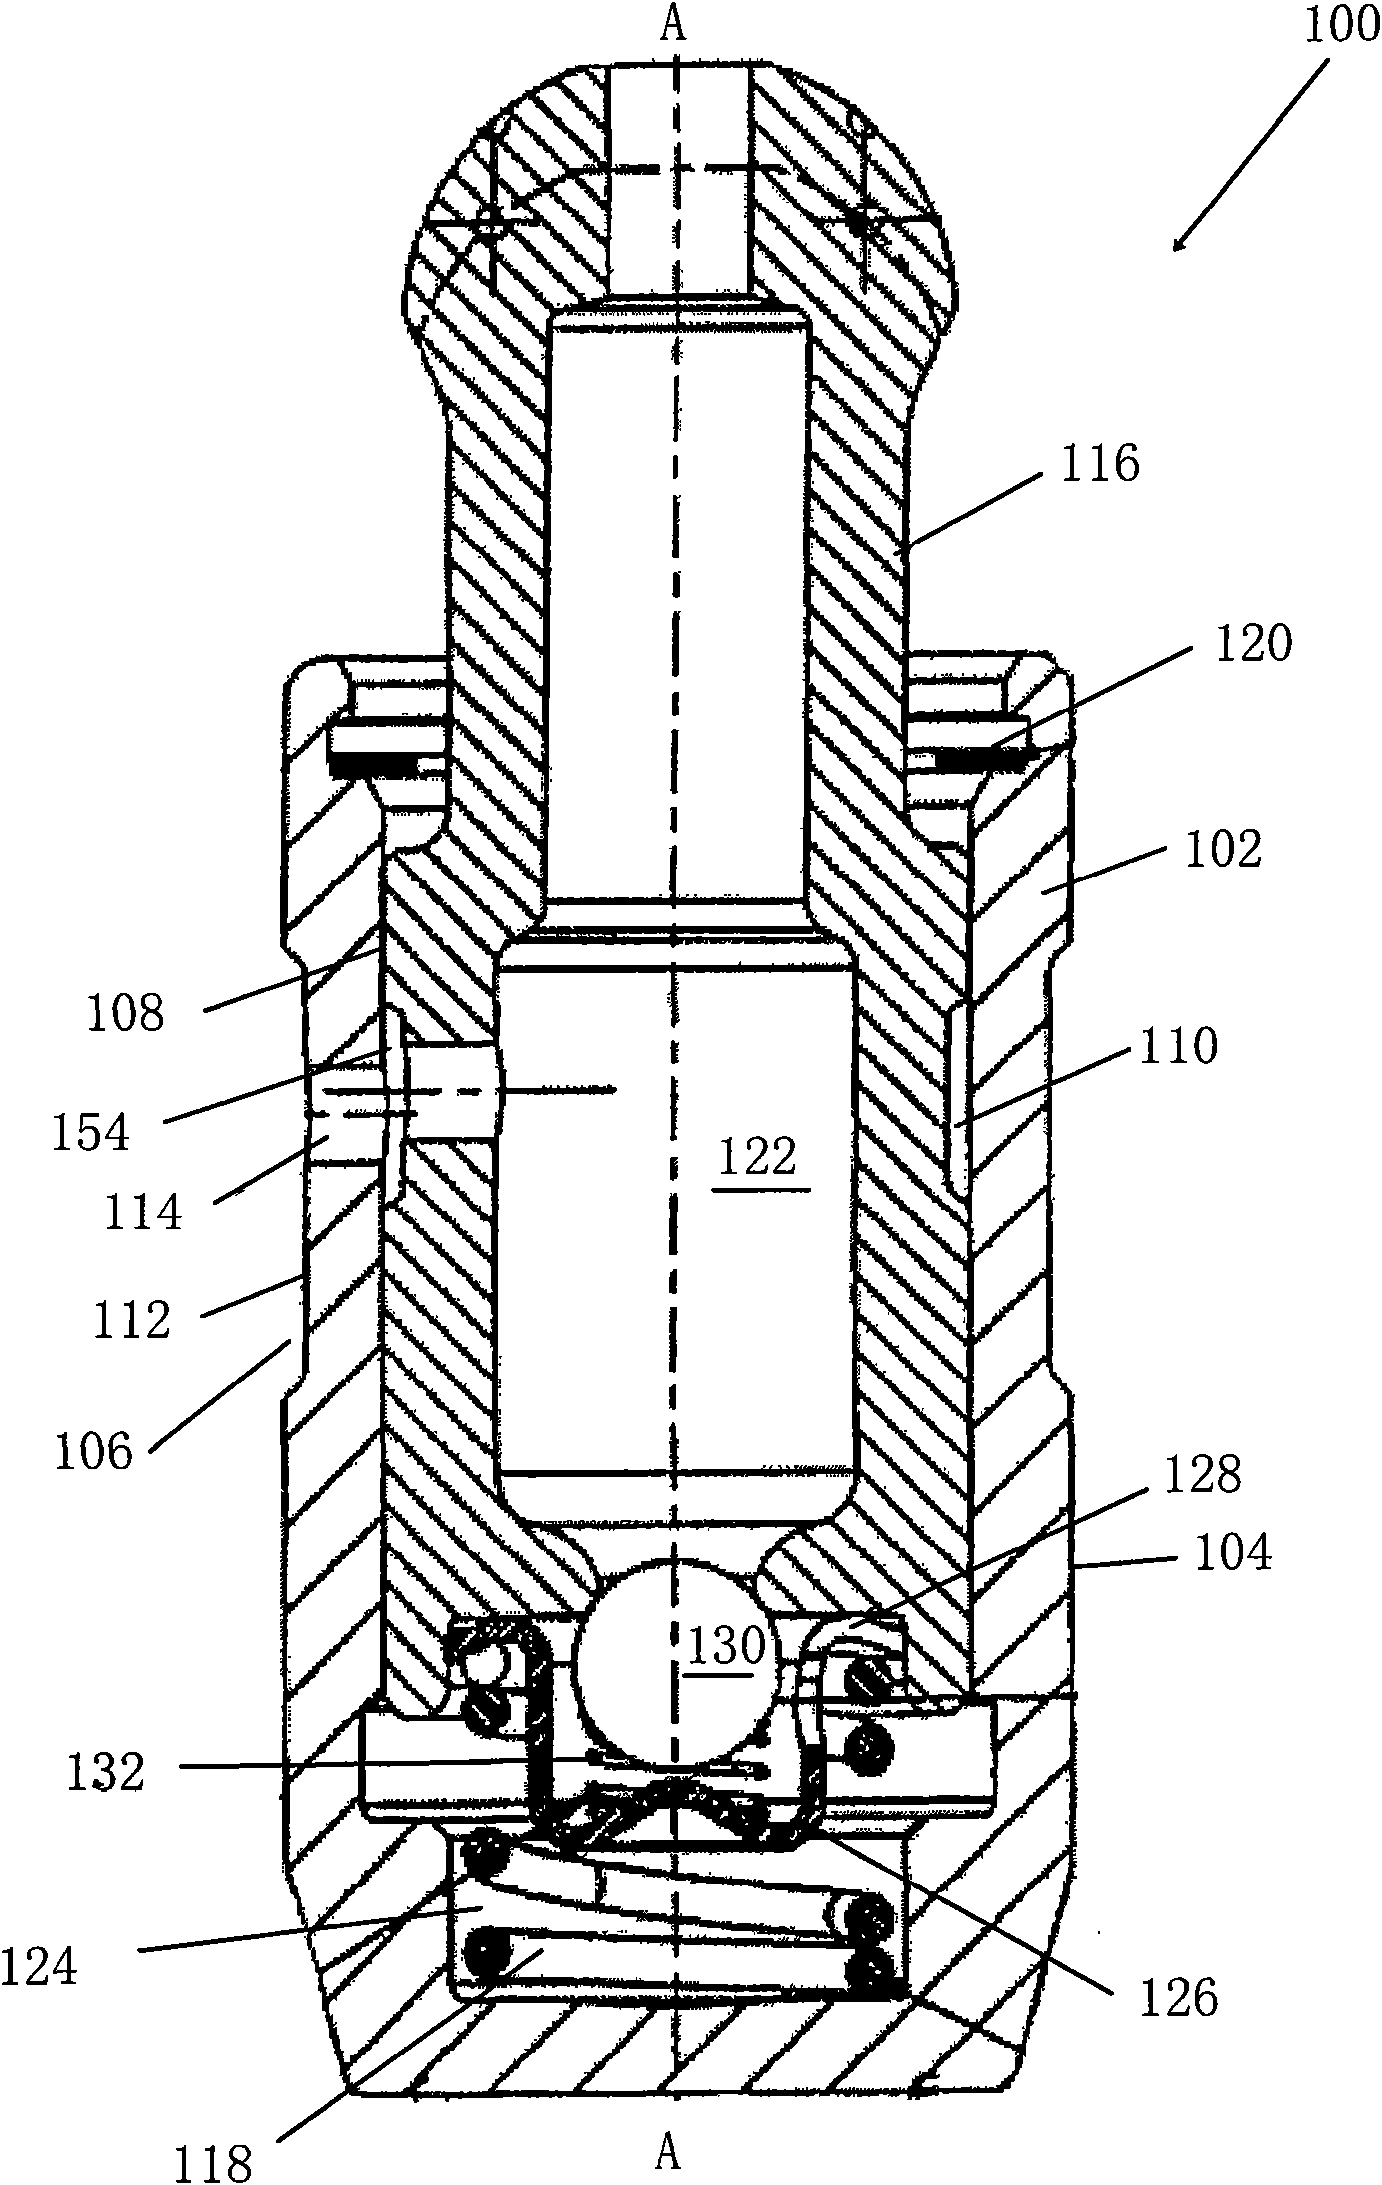 Ball plunger for use in a hydraulic lash adjuster and method of making same